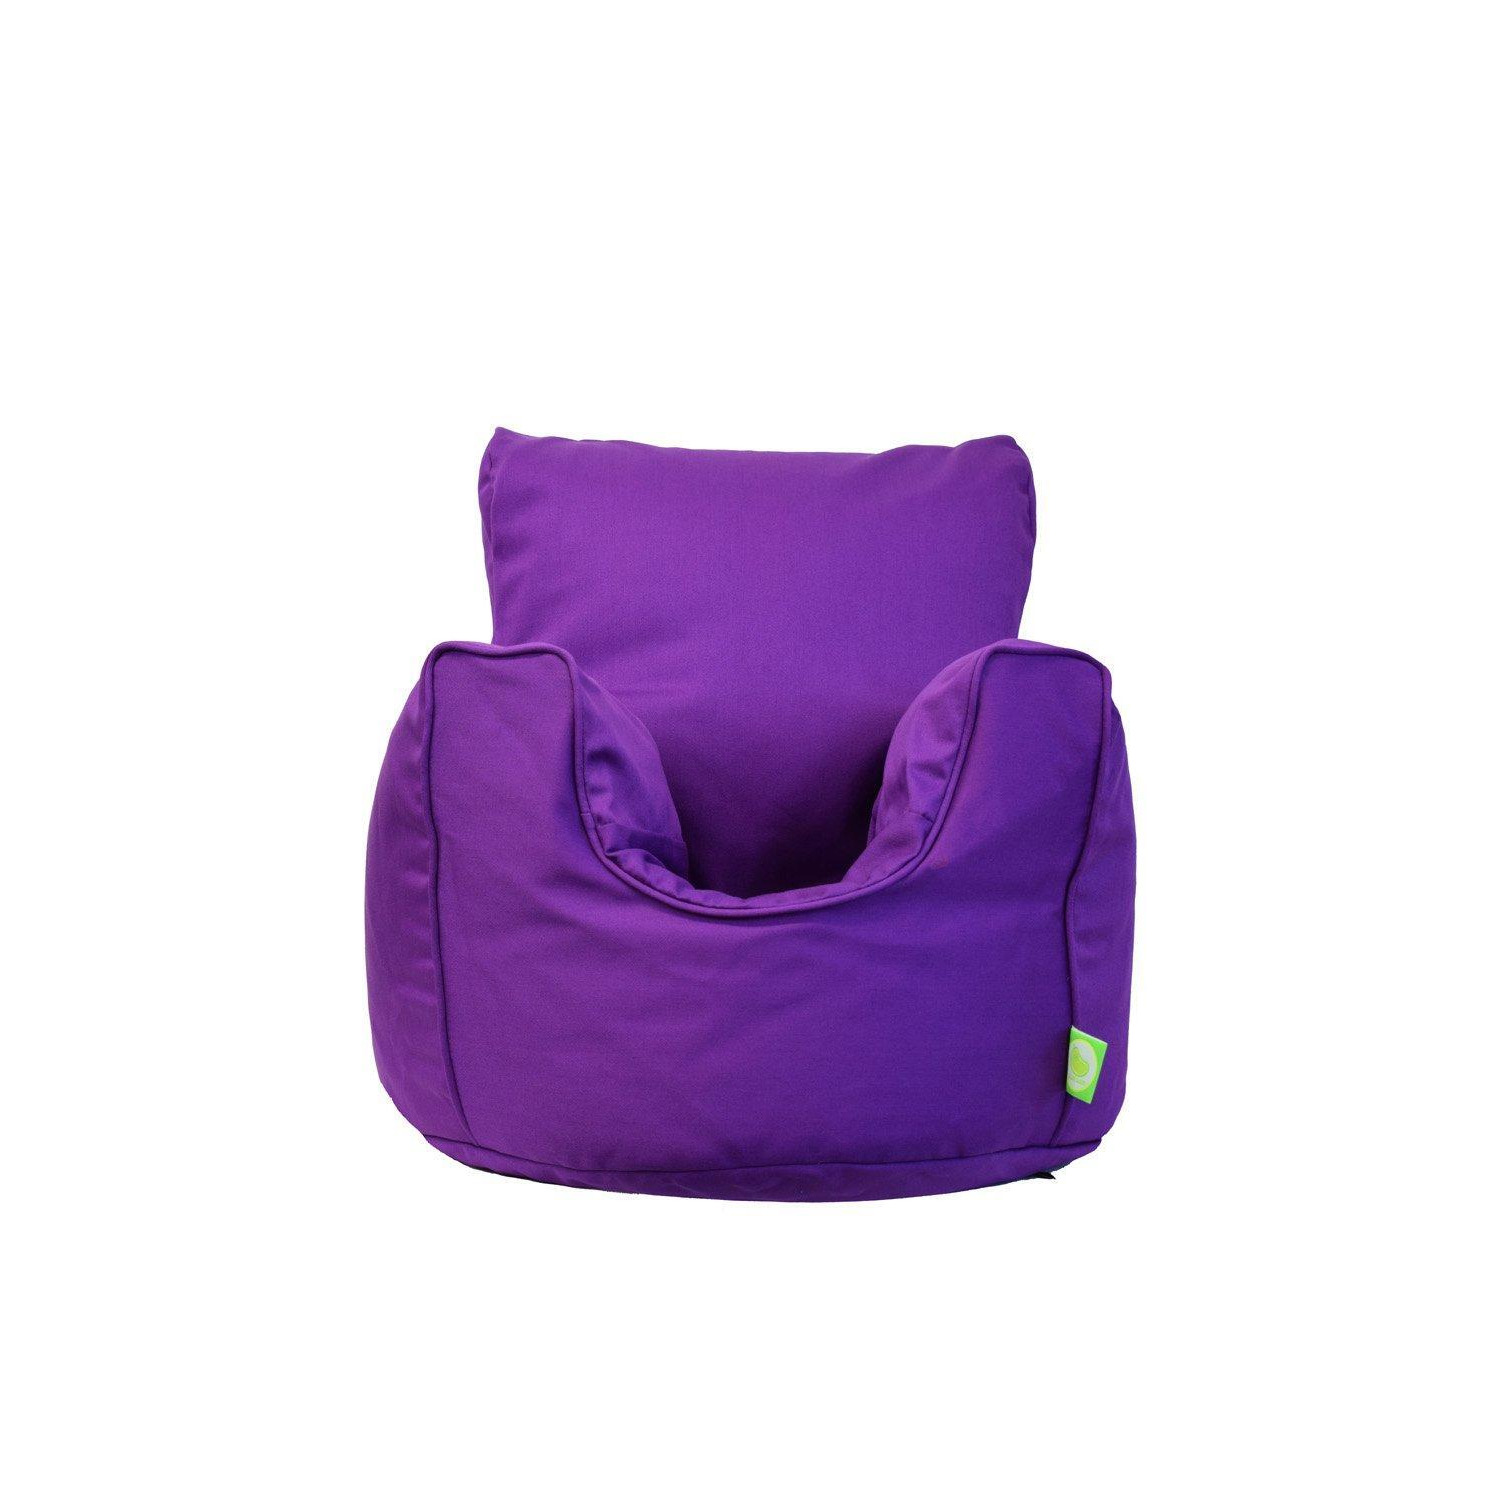 Cotton Twill Purple Bean Bag Arm Chair Toddler Size - image 1